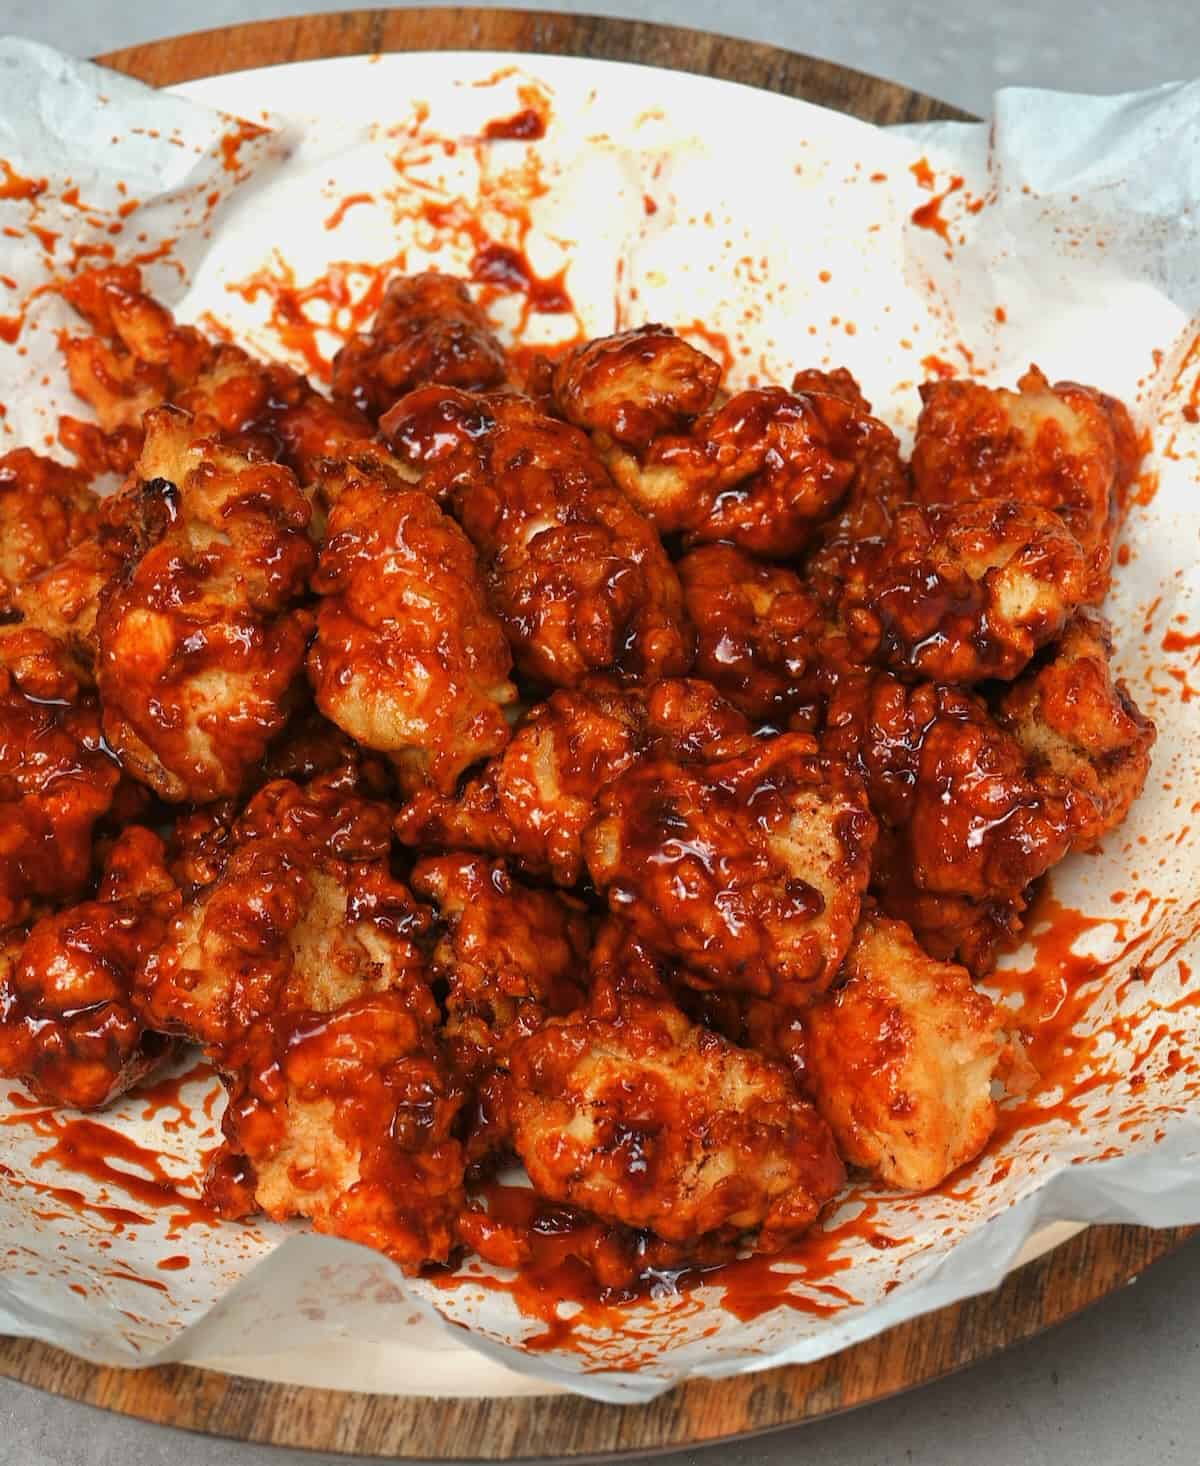 Fried chicken coated with chili sauce